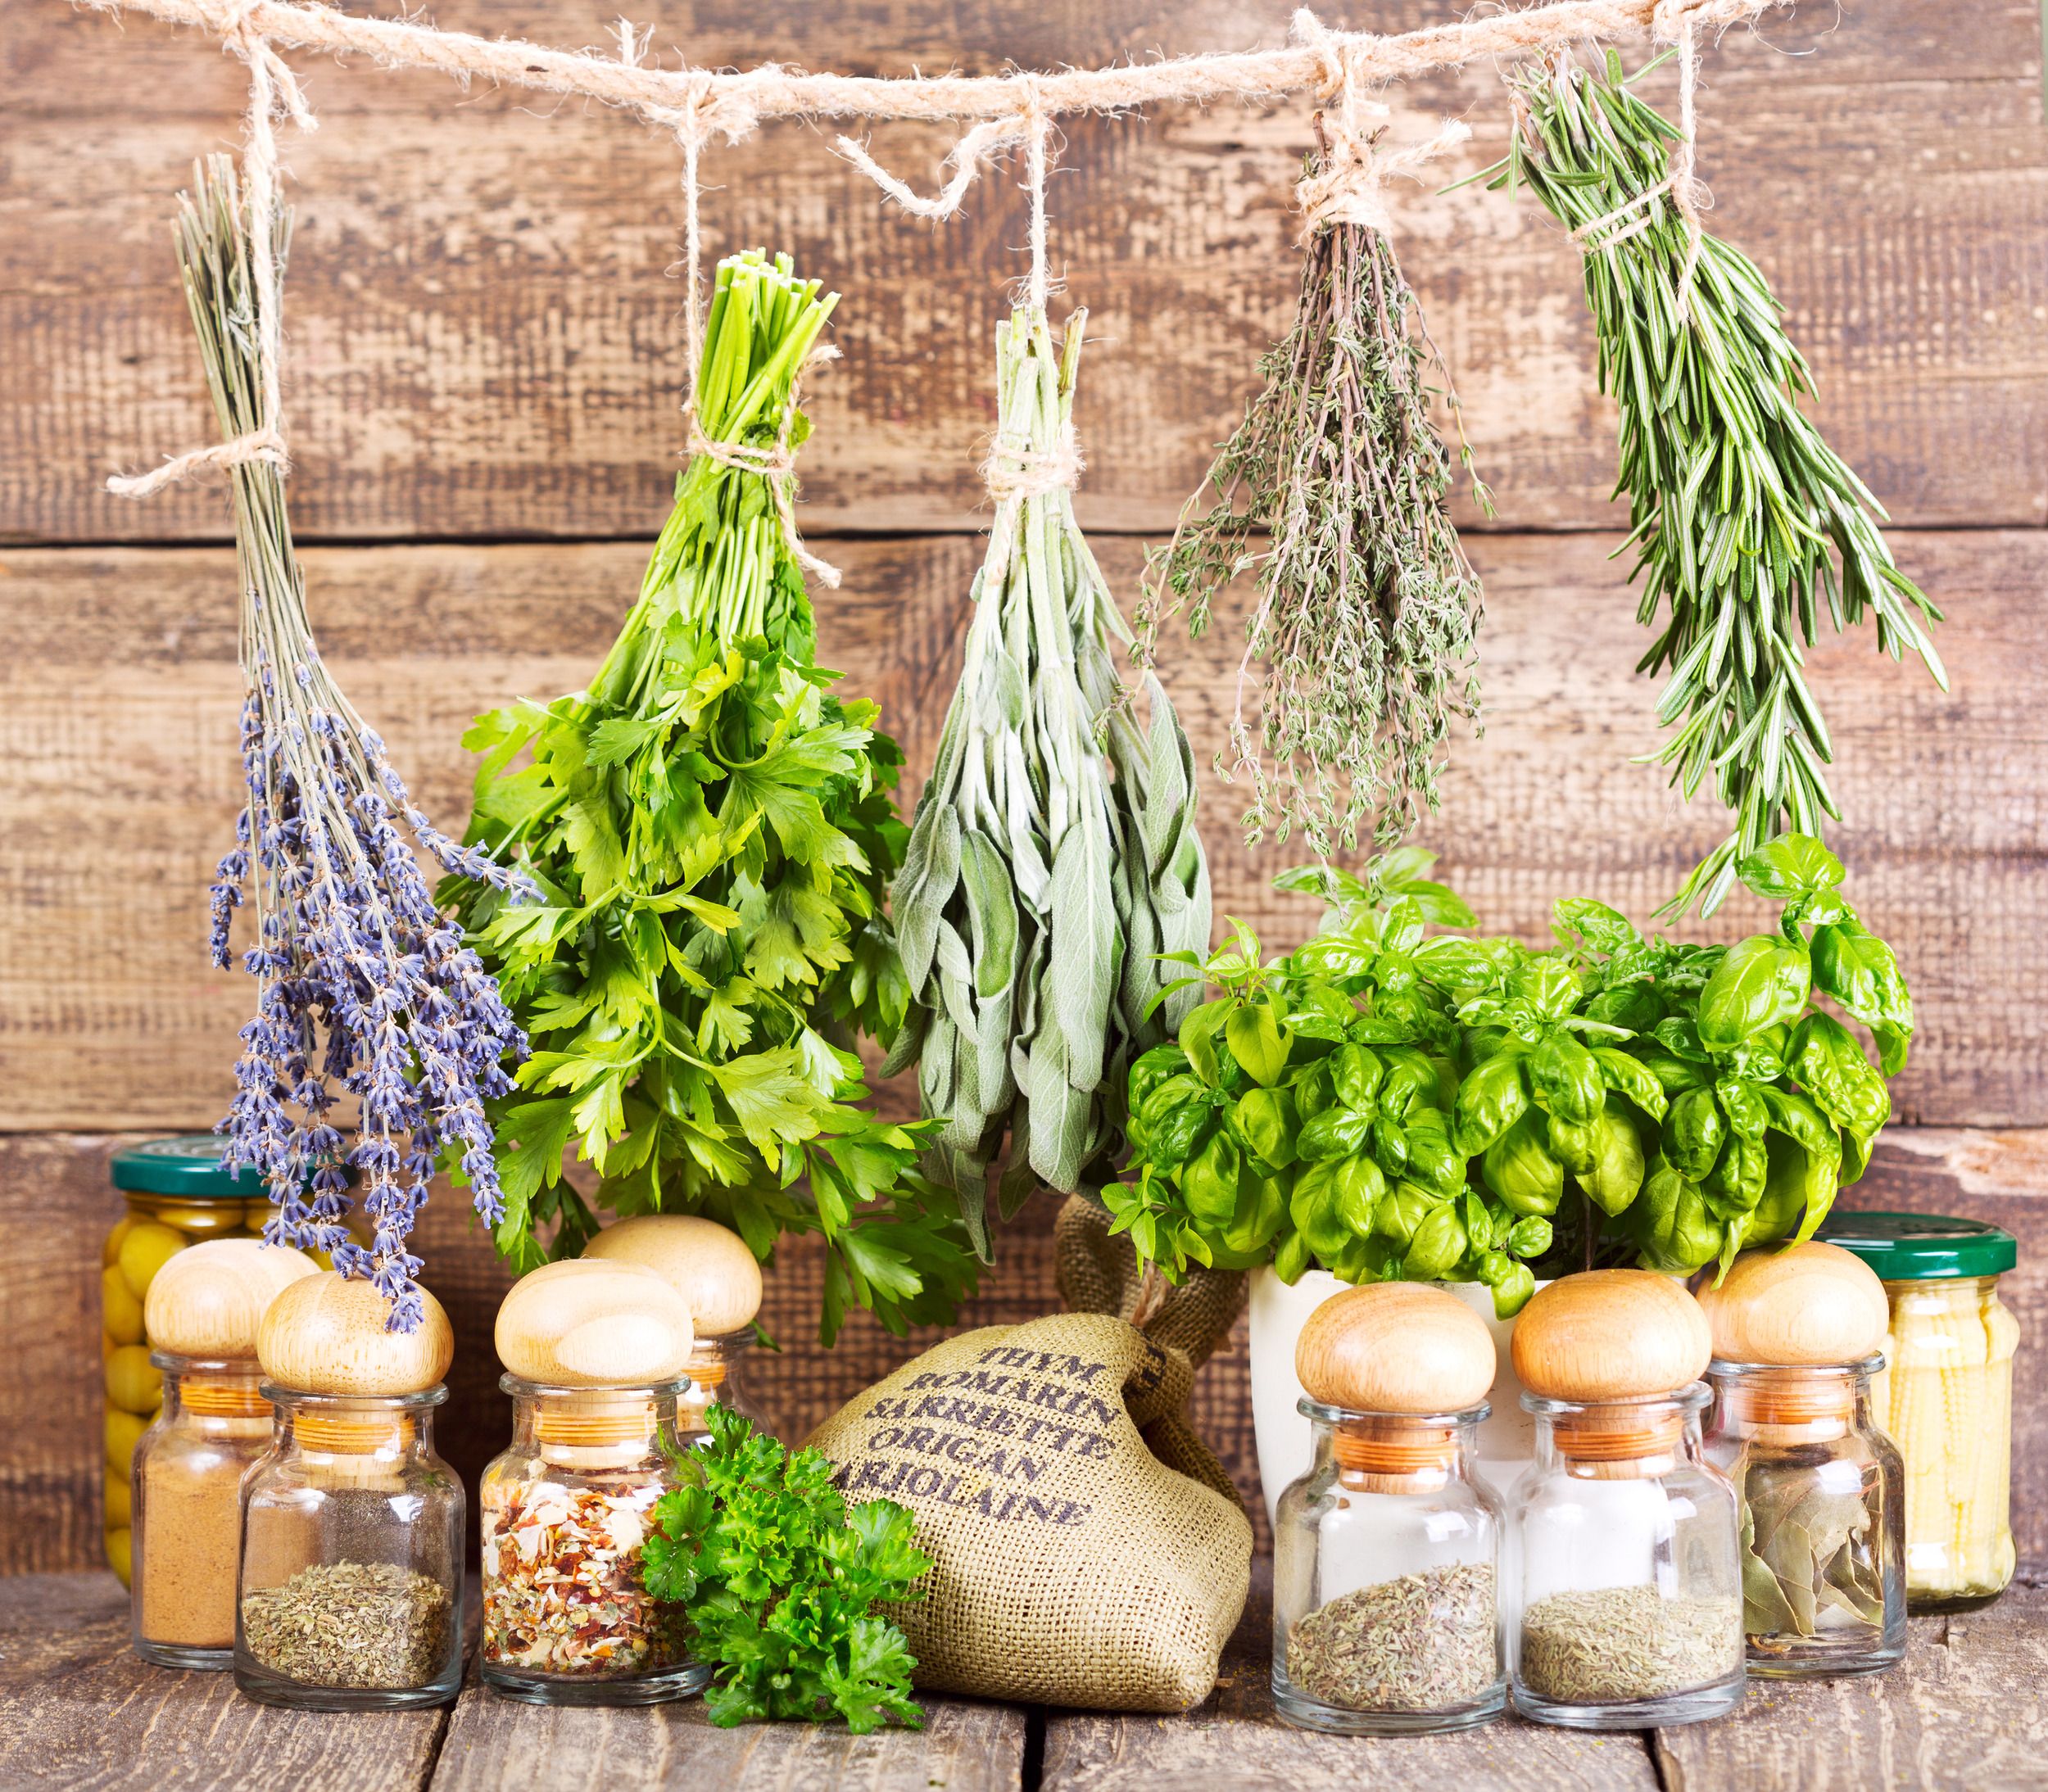 Fresh herbs hanging to dry over their dried compoents